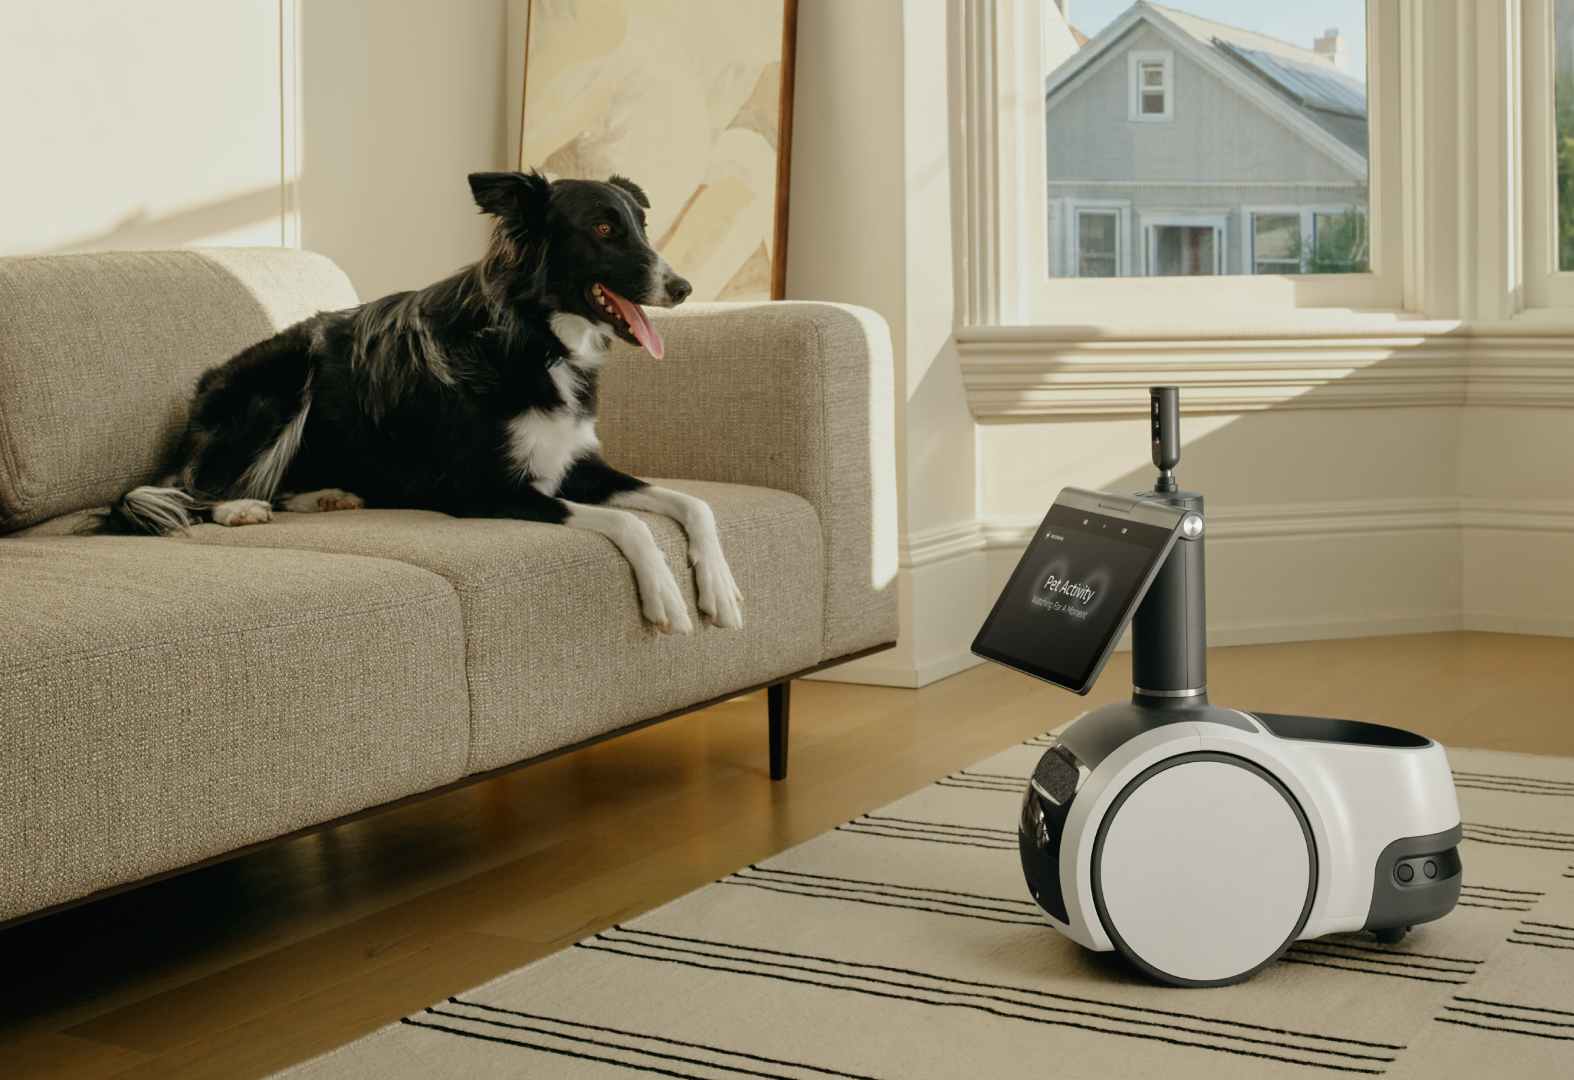 A dog laying on a couch next to an Amazon Astro device on the floor.